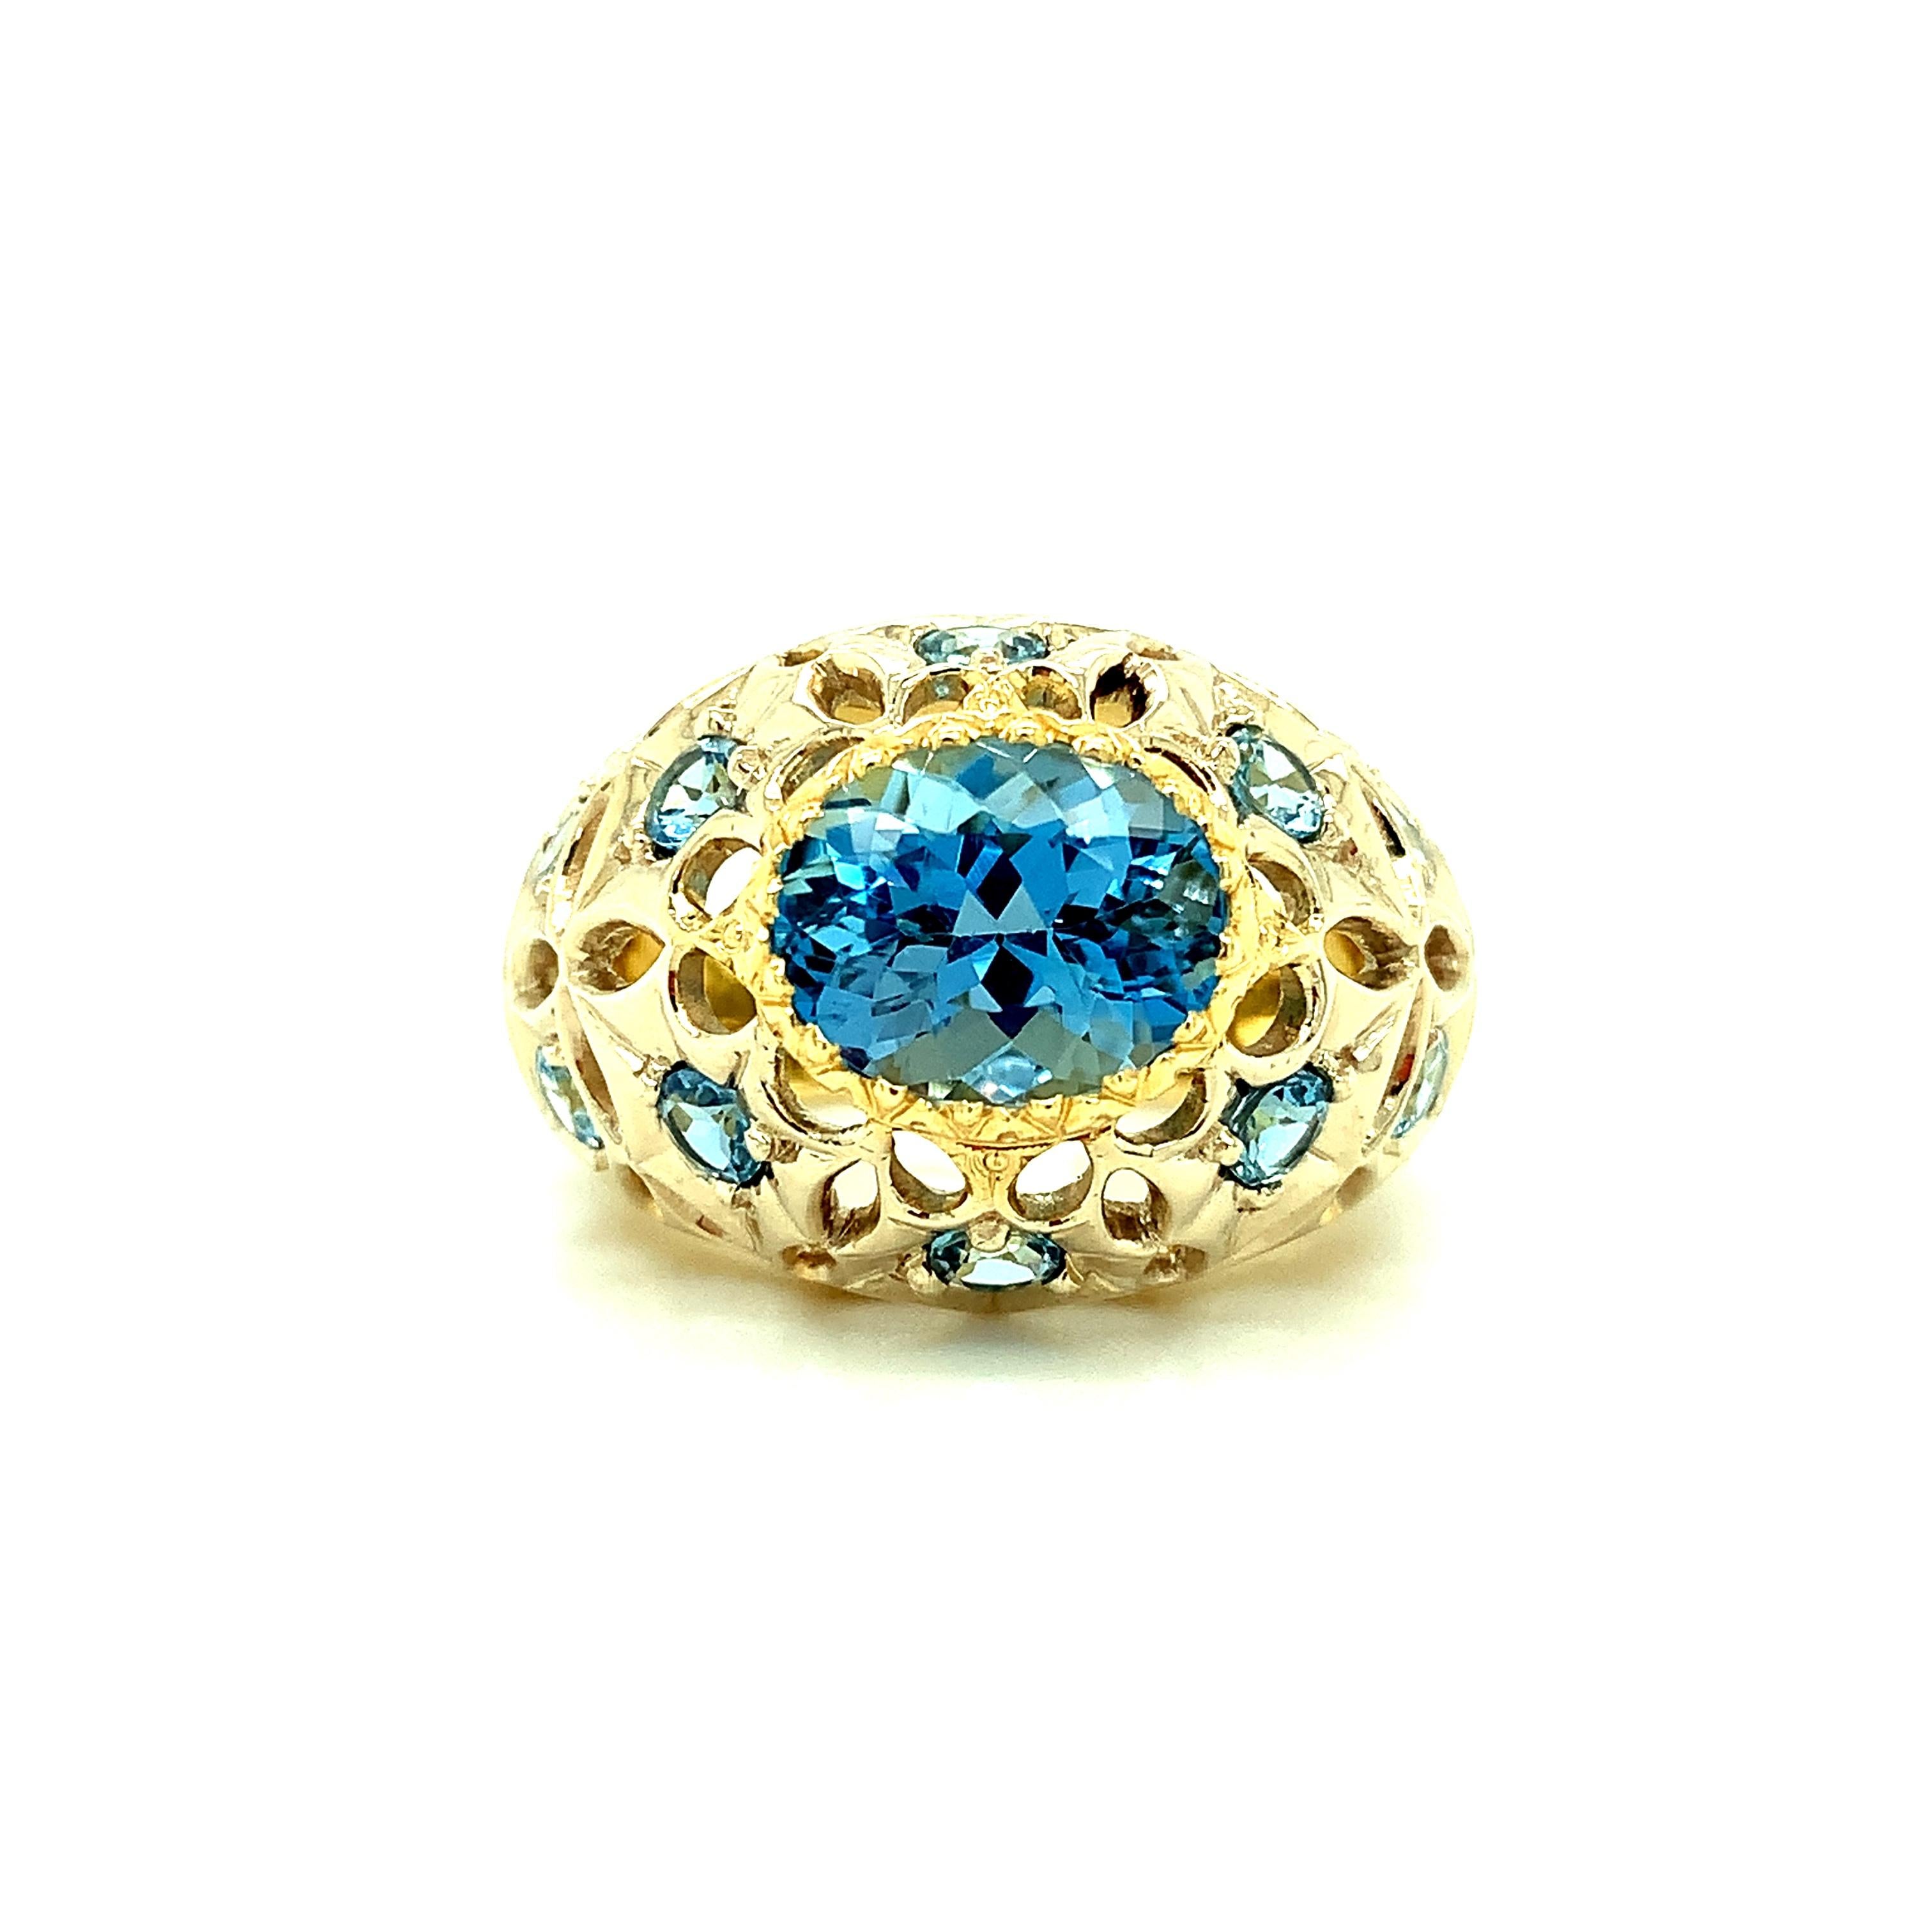 This gorgeous ring was inspired by Florentine craftsmanship and features a vivid, turquoise blue aquamarine of the finest quality! This gemstone has exceptional color and is showcased beautifully in this elaborate, 18k yellow gold, intricately hand